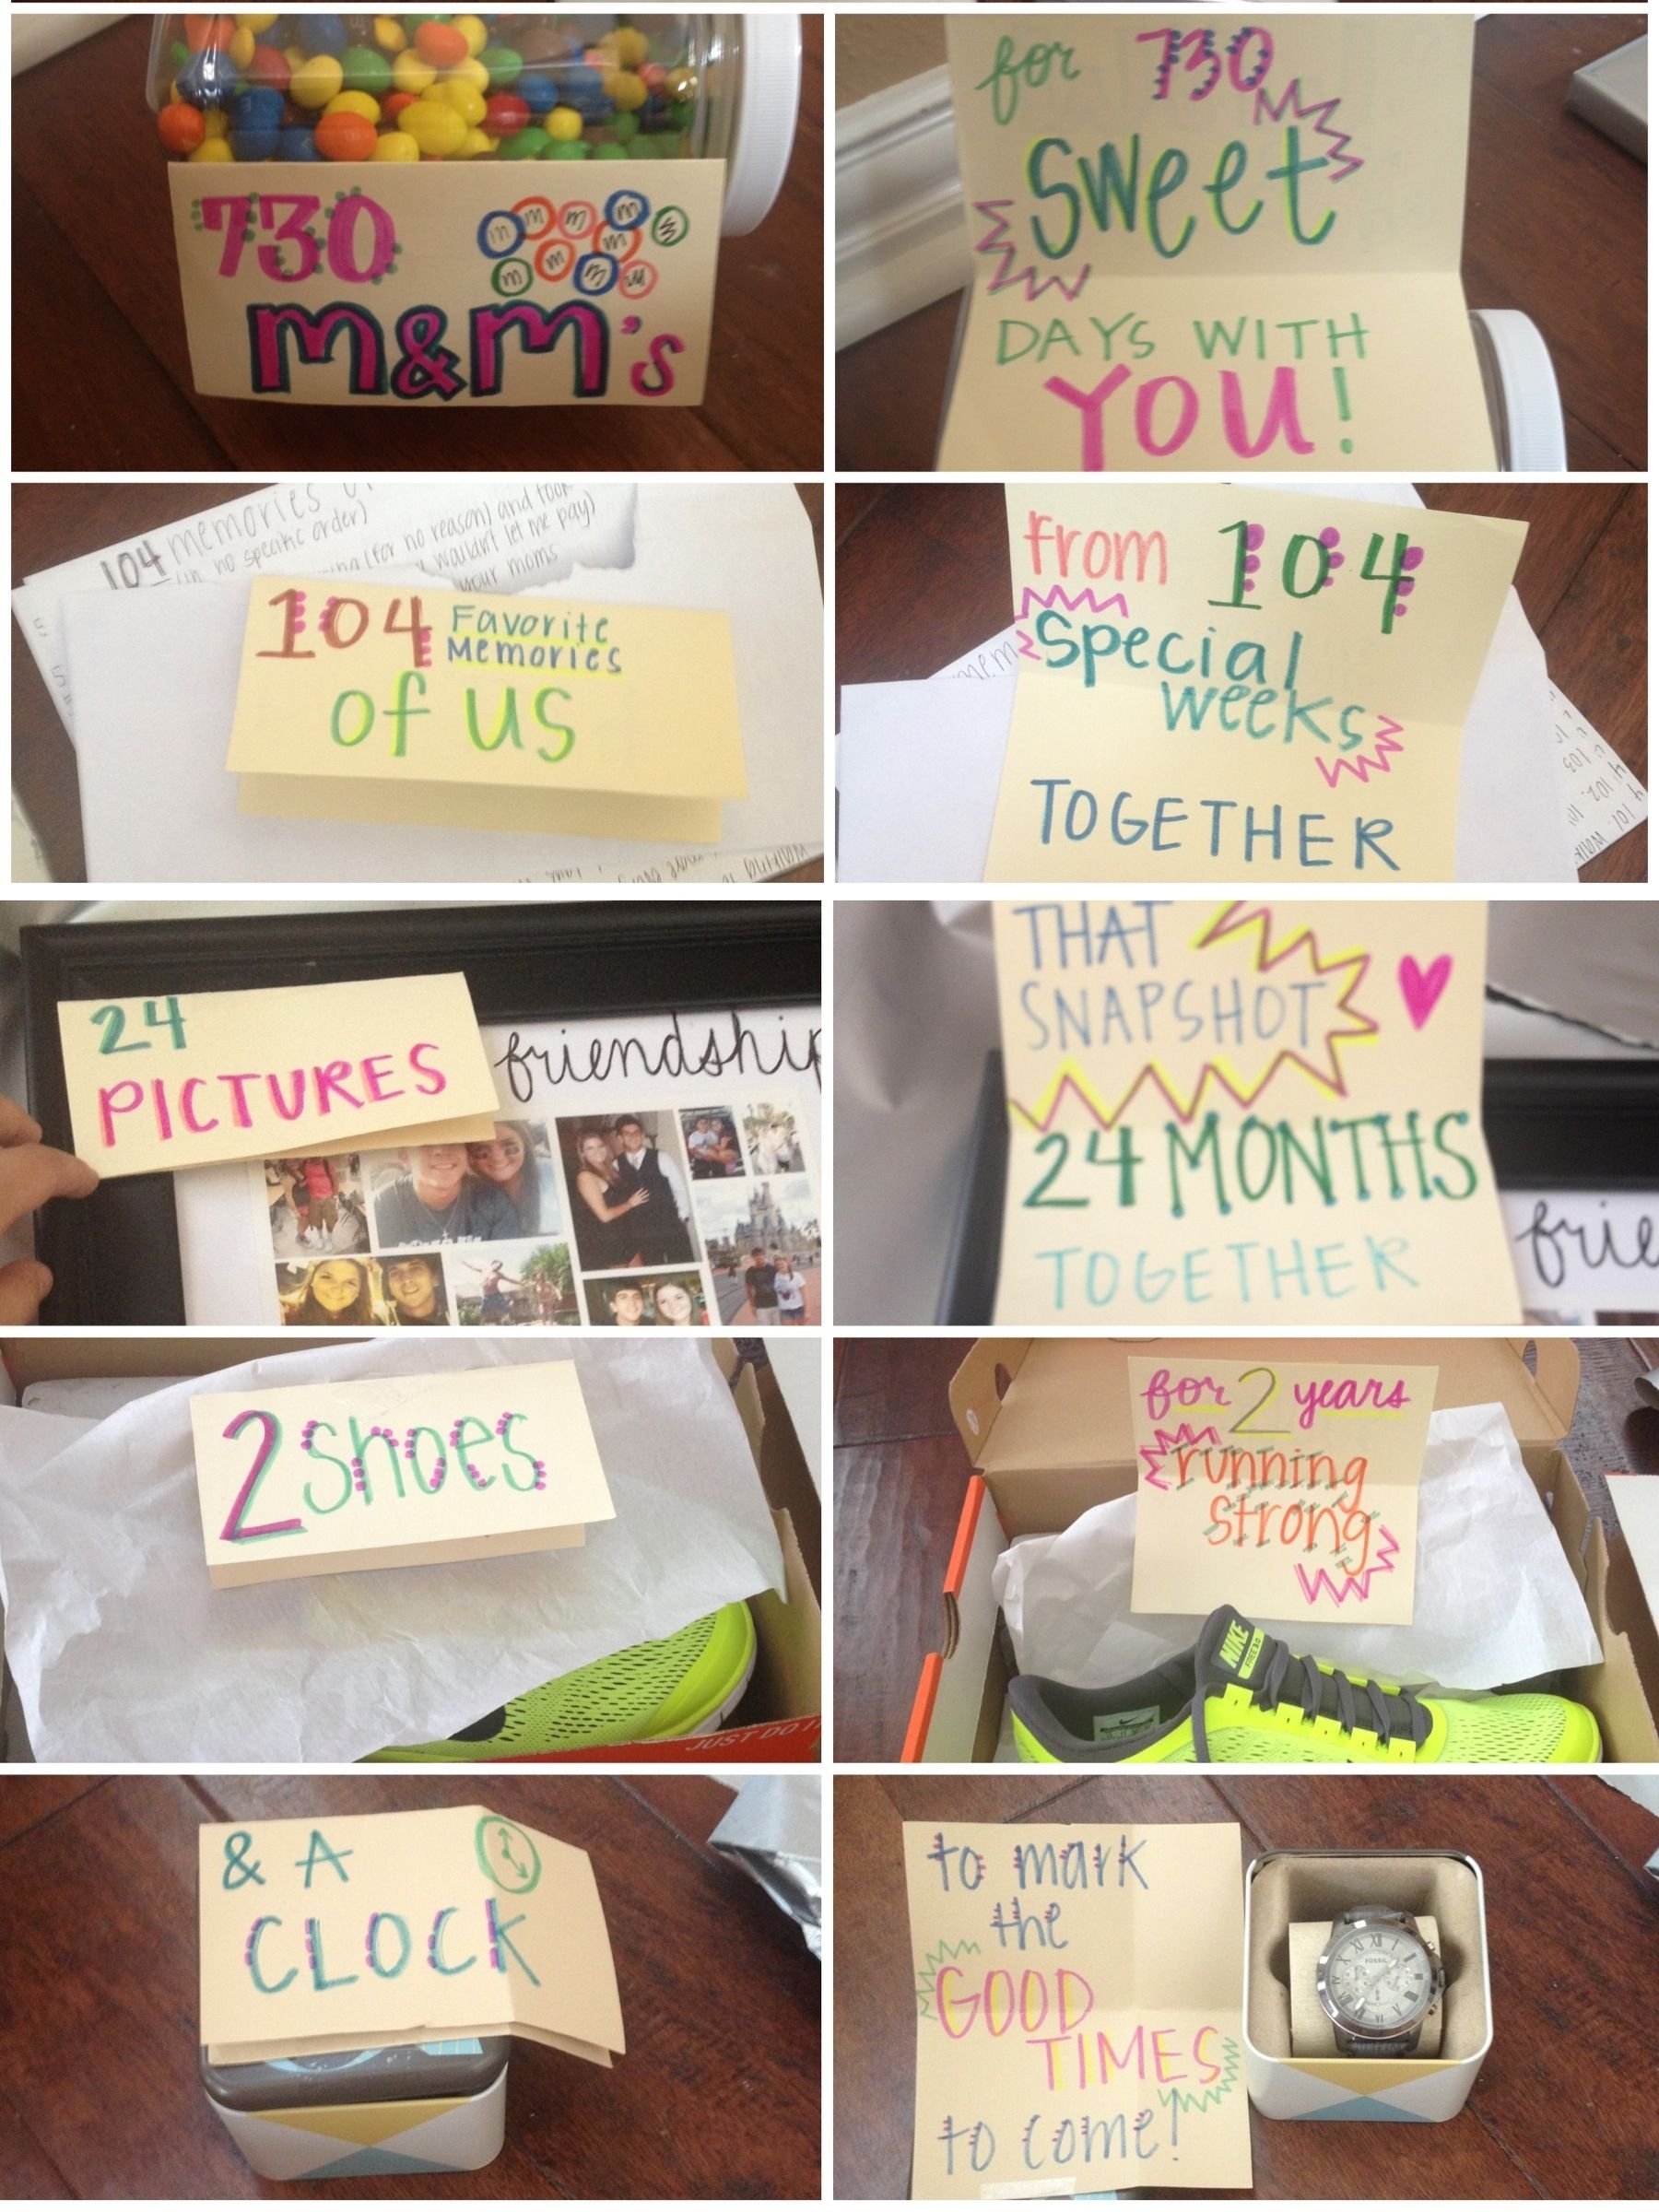 10 Fabulous Ideas For 2 Year Anniversary even though the two years has passed i could use this for 22 2022